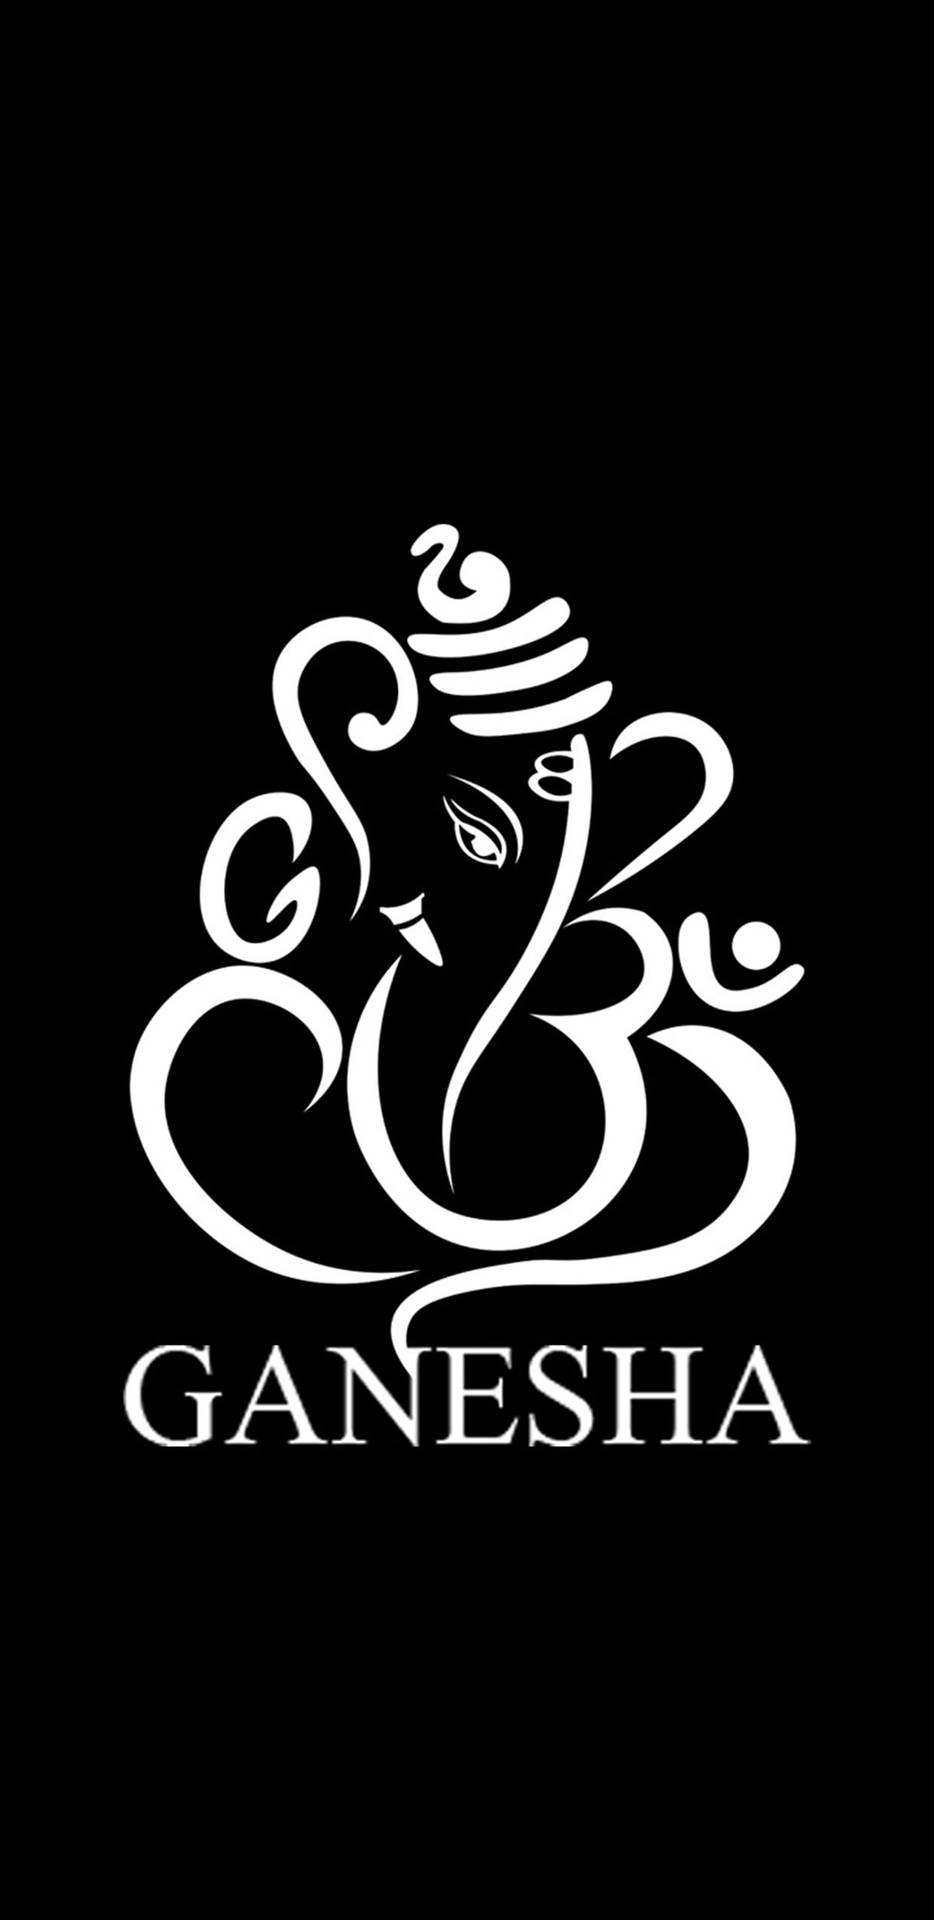 Caption: Graceful Representation Of Lord Ganesh In Monochrome Background